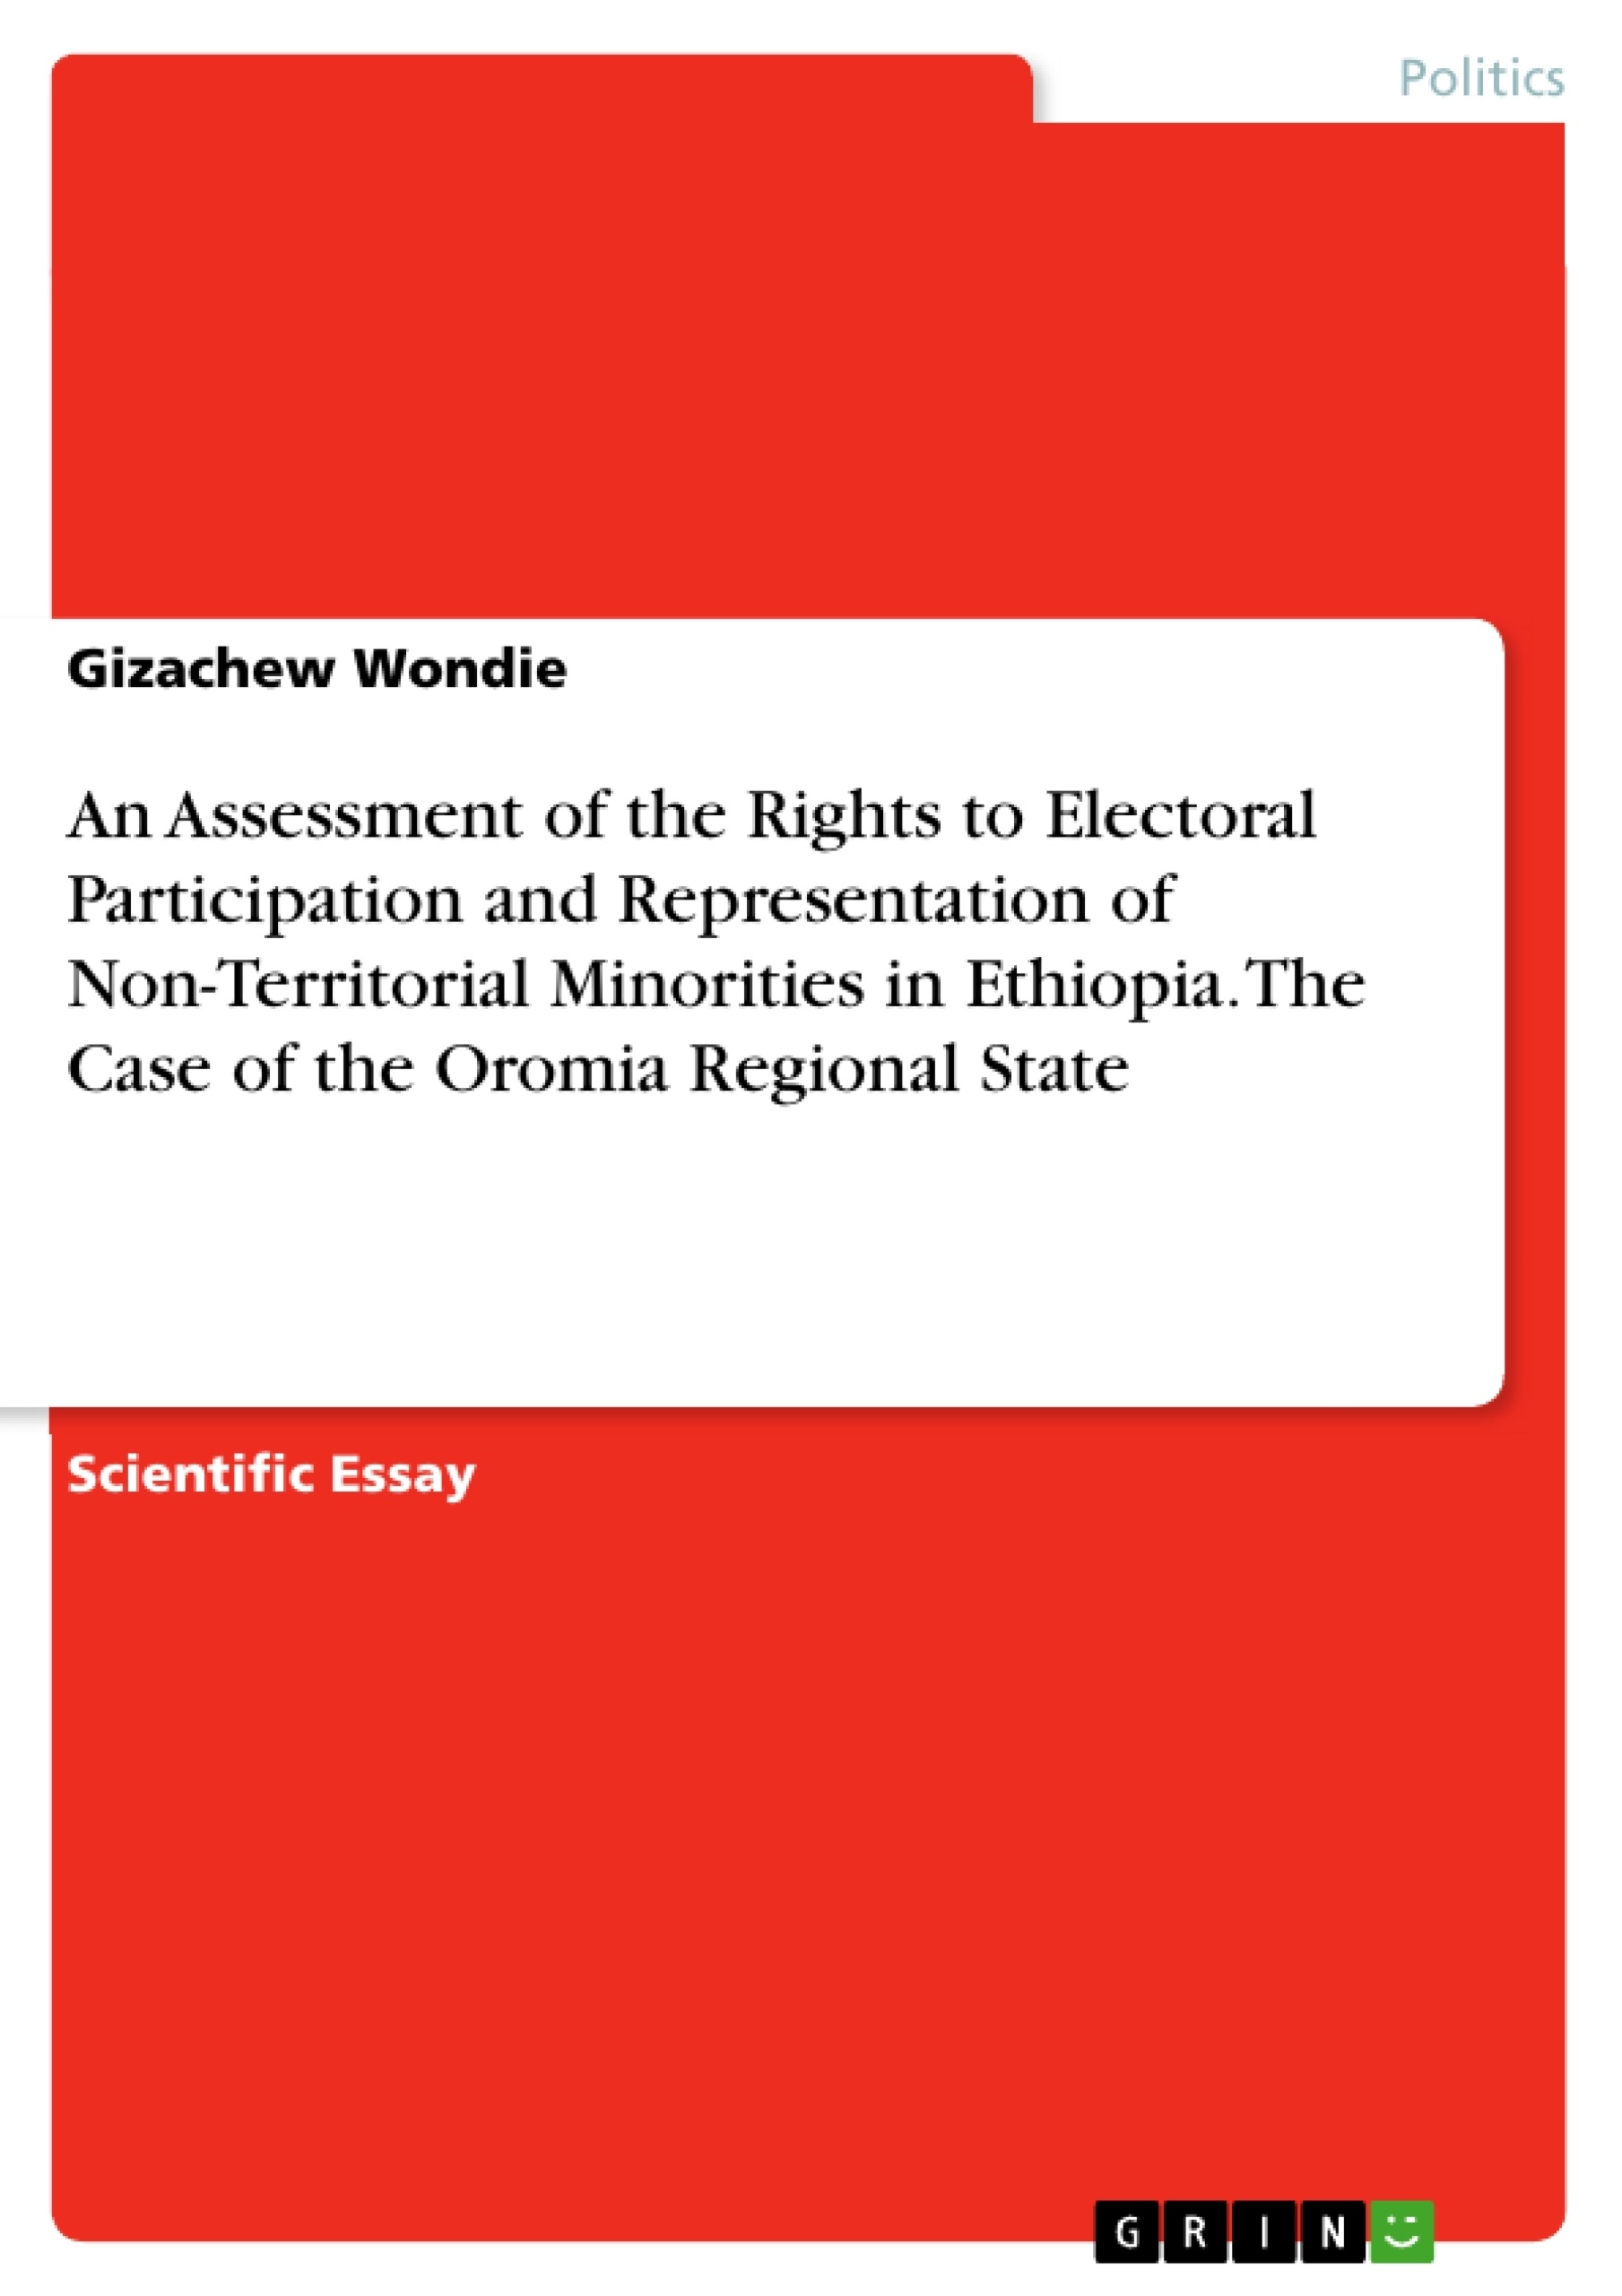 Title: An Assessment of the Rights to Electoral Participation and Representation of Non-Territorial Minorities in Ethiopia. The Case of the Oromia Regional State